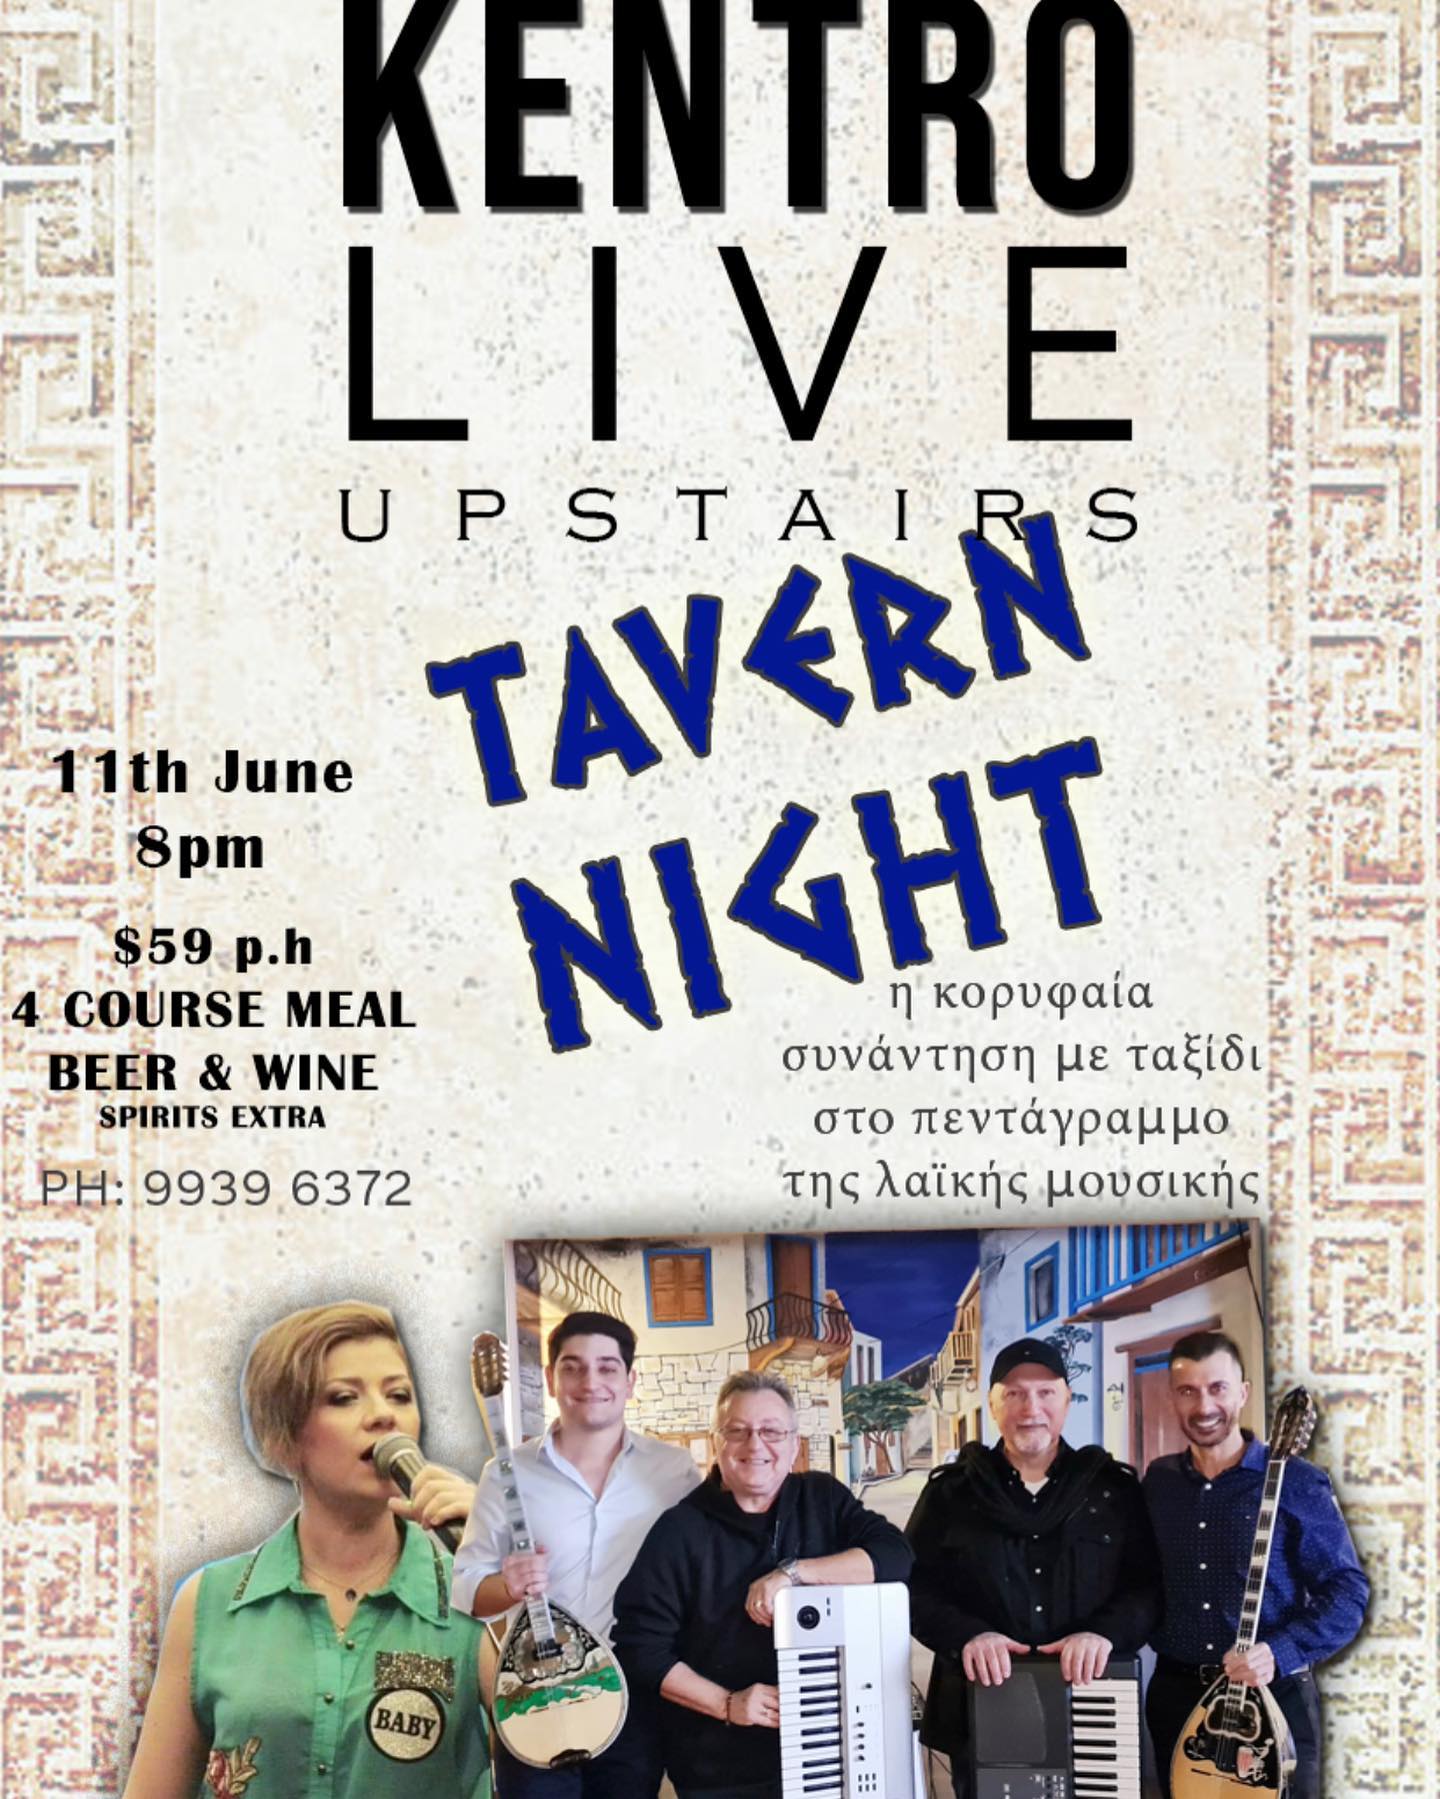 🎤 🎶 TAVERN NIGHT 🇬🇷🎶

11th June $59 per head
4 course meal including meat, seafood, cheeses, dips
(03) 9939 6372 Bookings
🇬🇷UNMISSABLE NIGHT 🇬🇷